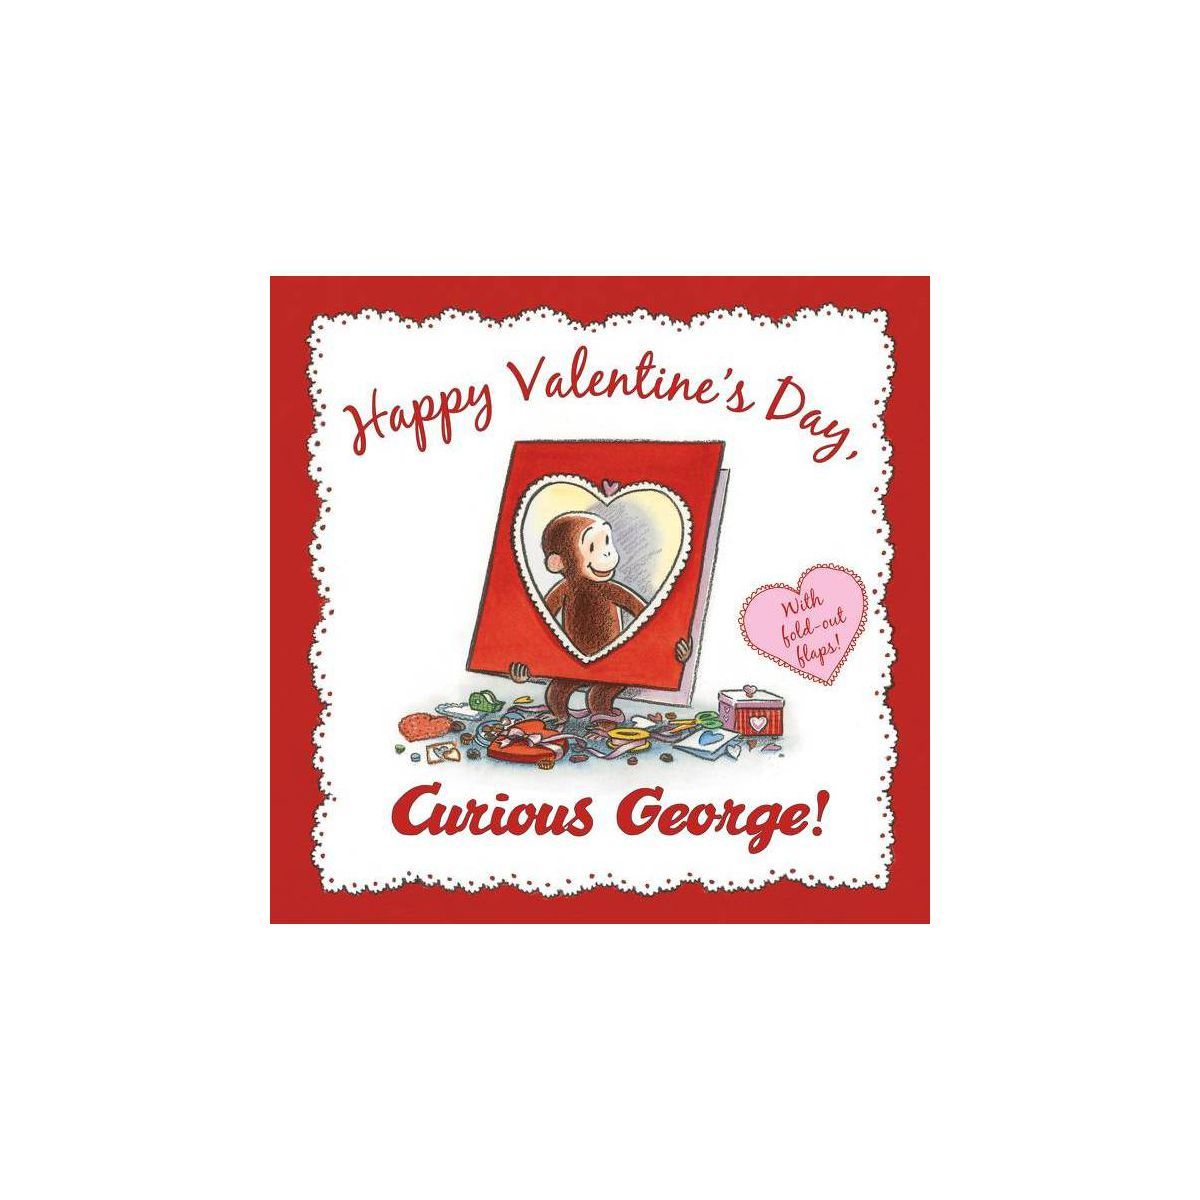 Happy Valentine's Day Curious George - Curious George Series (Hardcover) By H. A. Rey, | Target